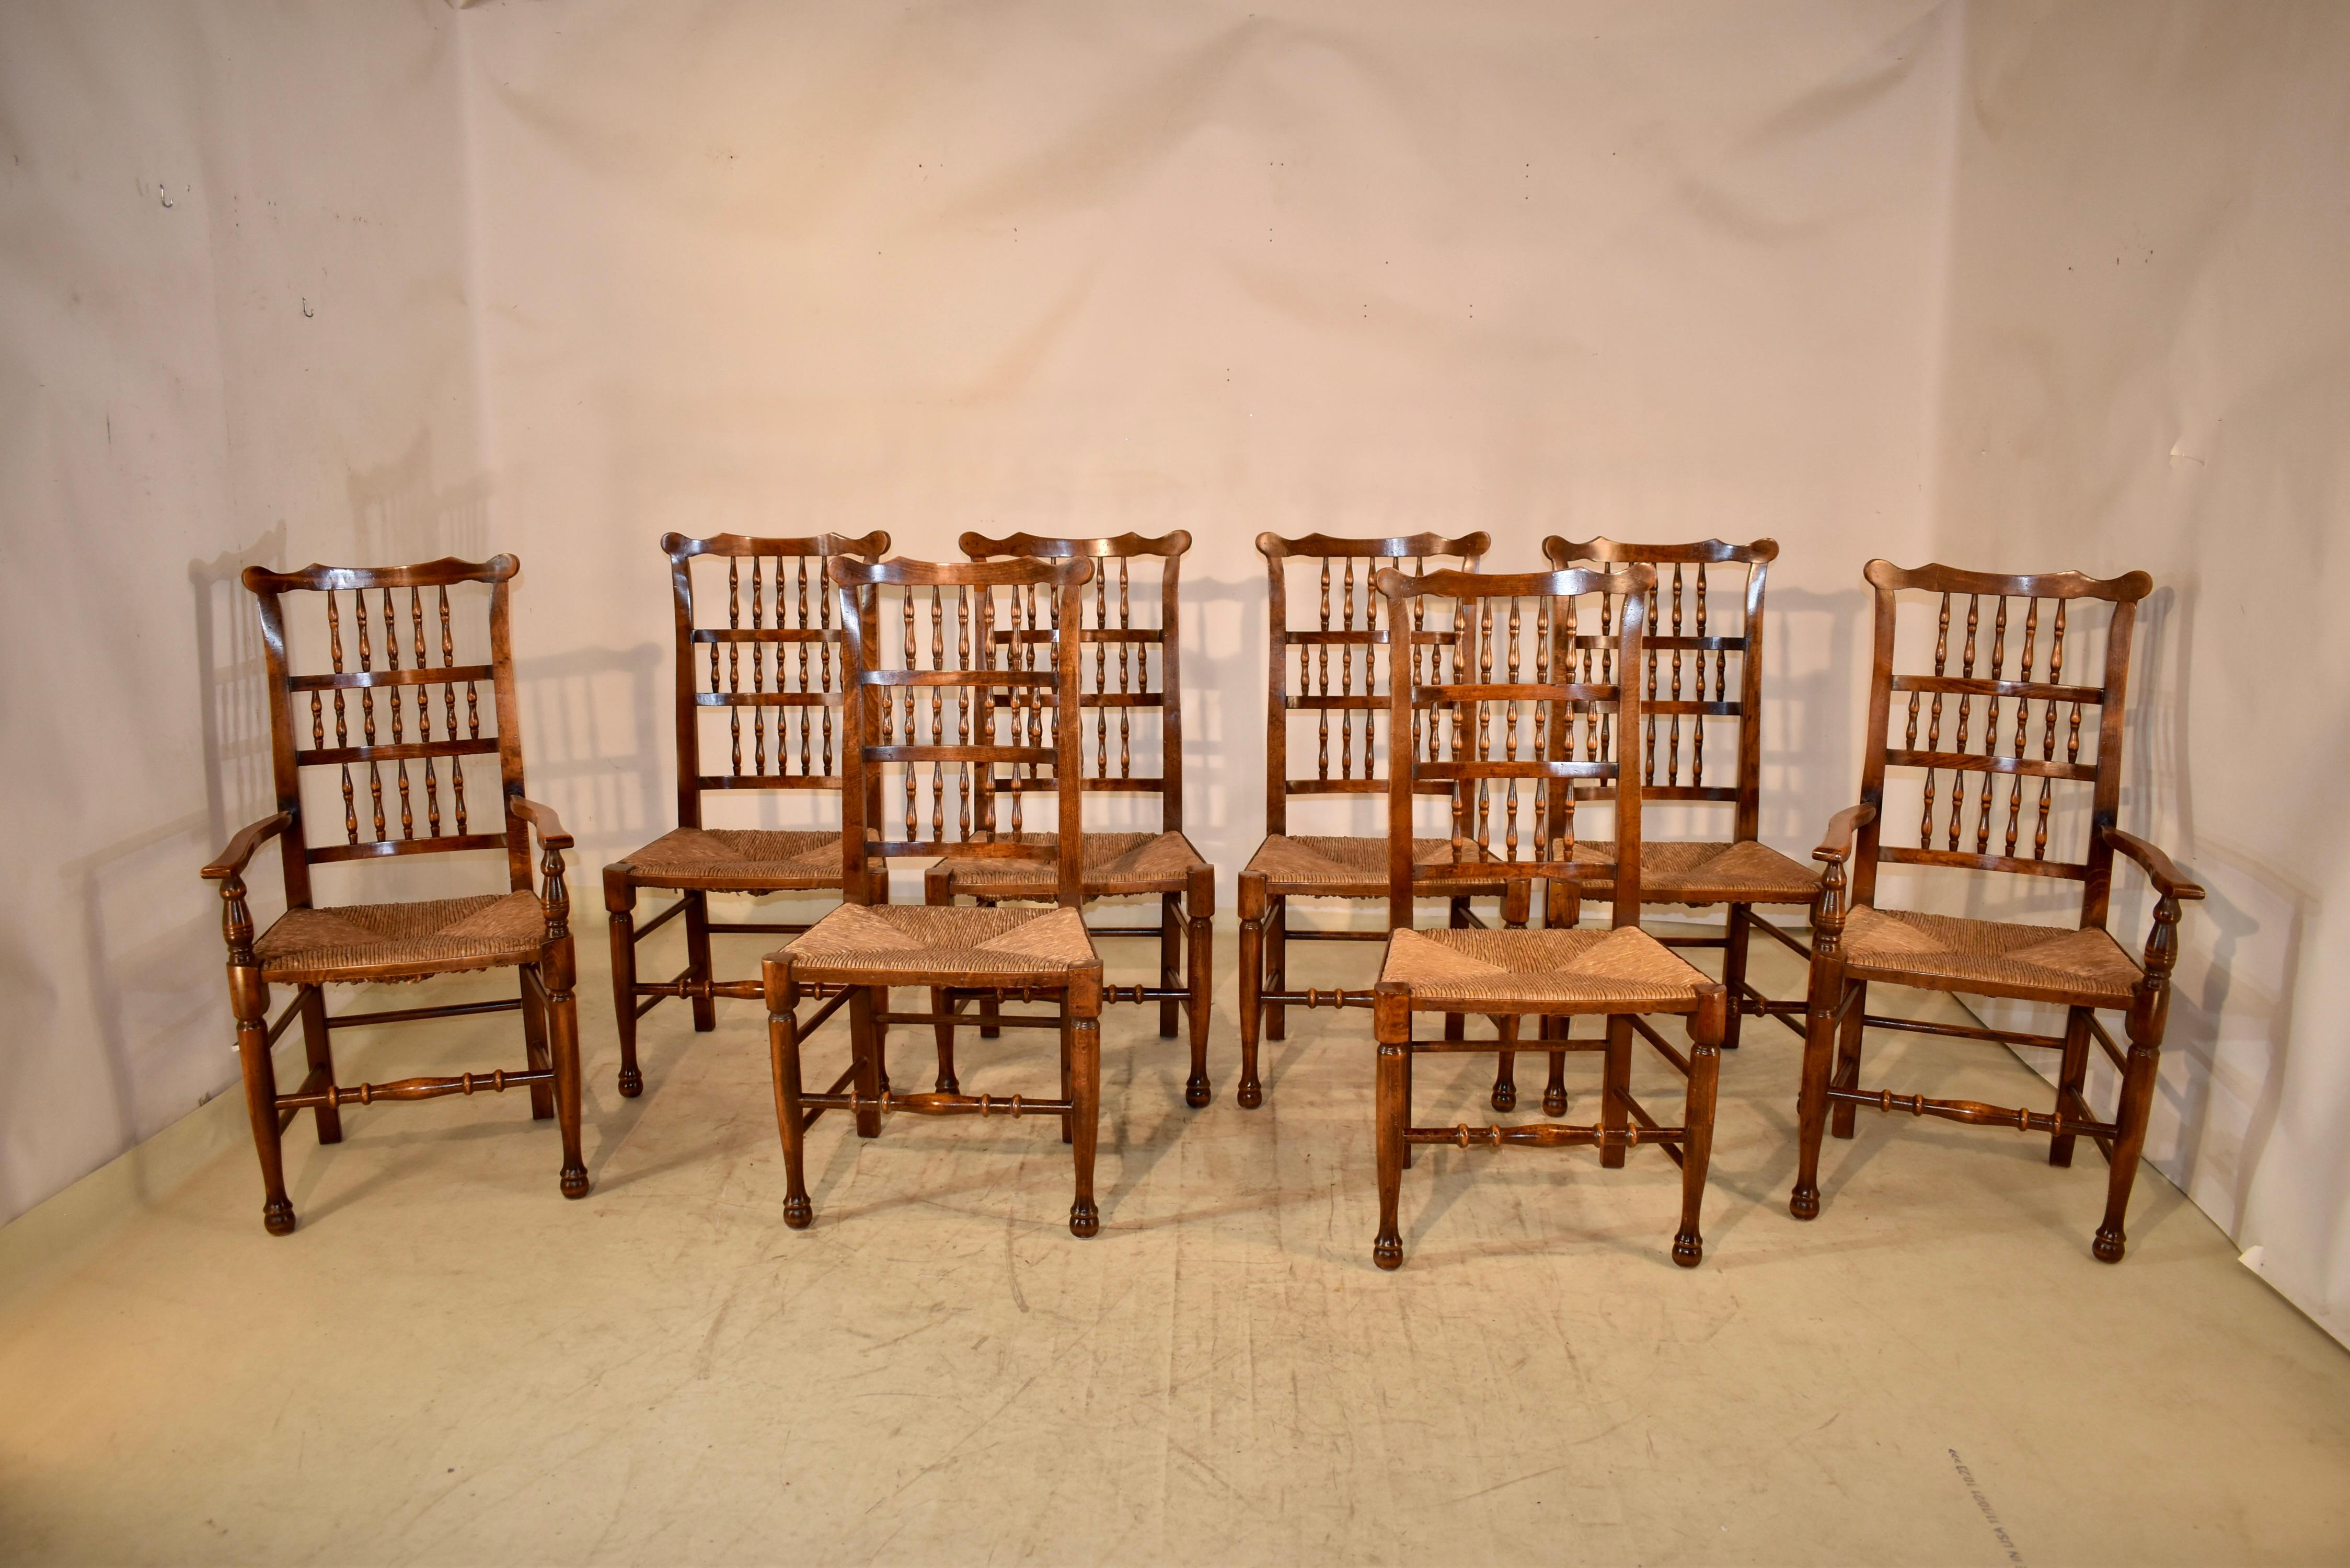 Set of eight ash spindle back chairs from England with woven rush seats, circa 1920. There are two armchairs and six side chairs. The set of chairs are a wonderful form and are made from rich colored ash wood.  The backs have ears at the top, and